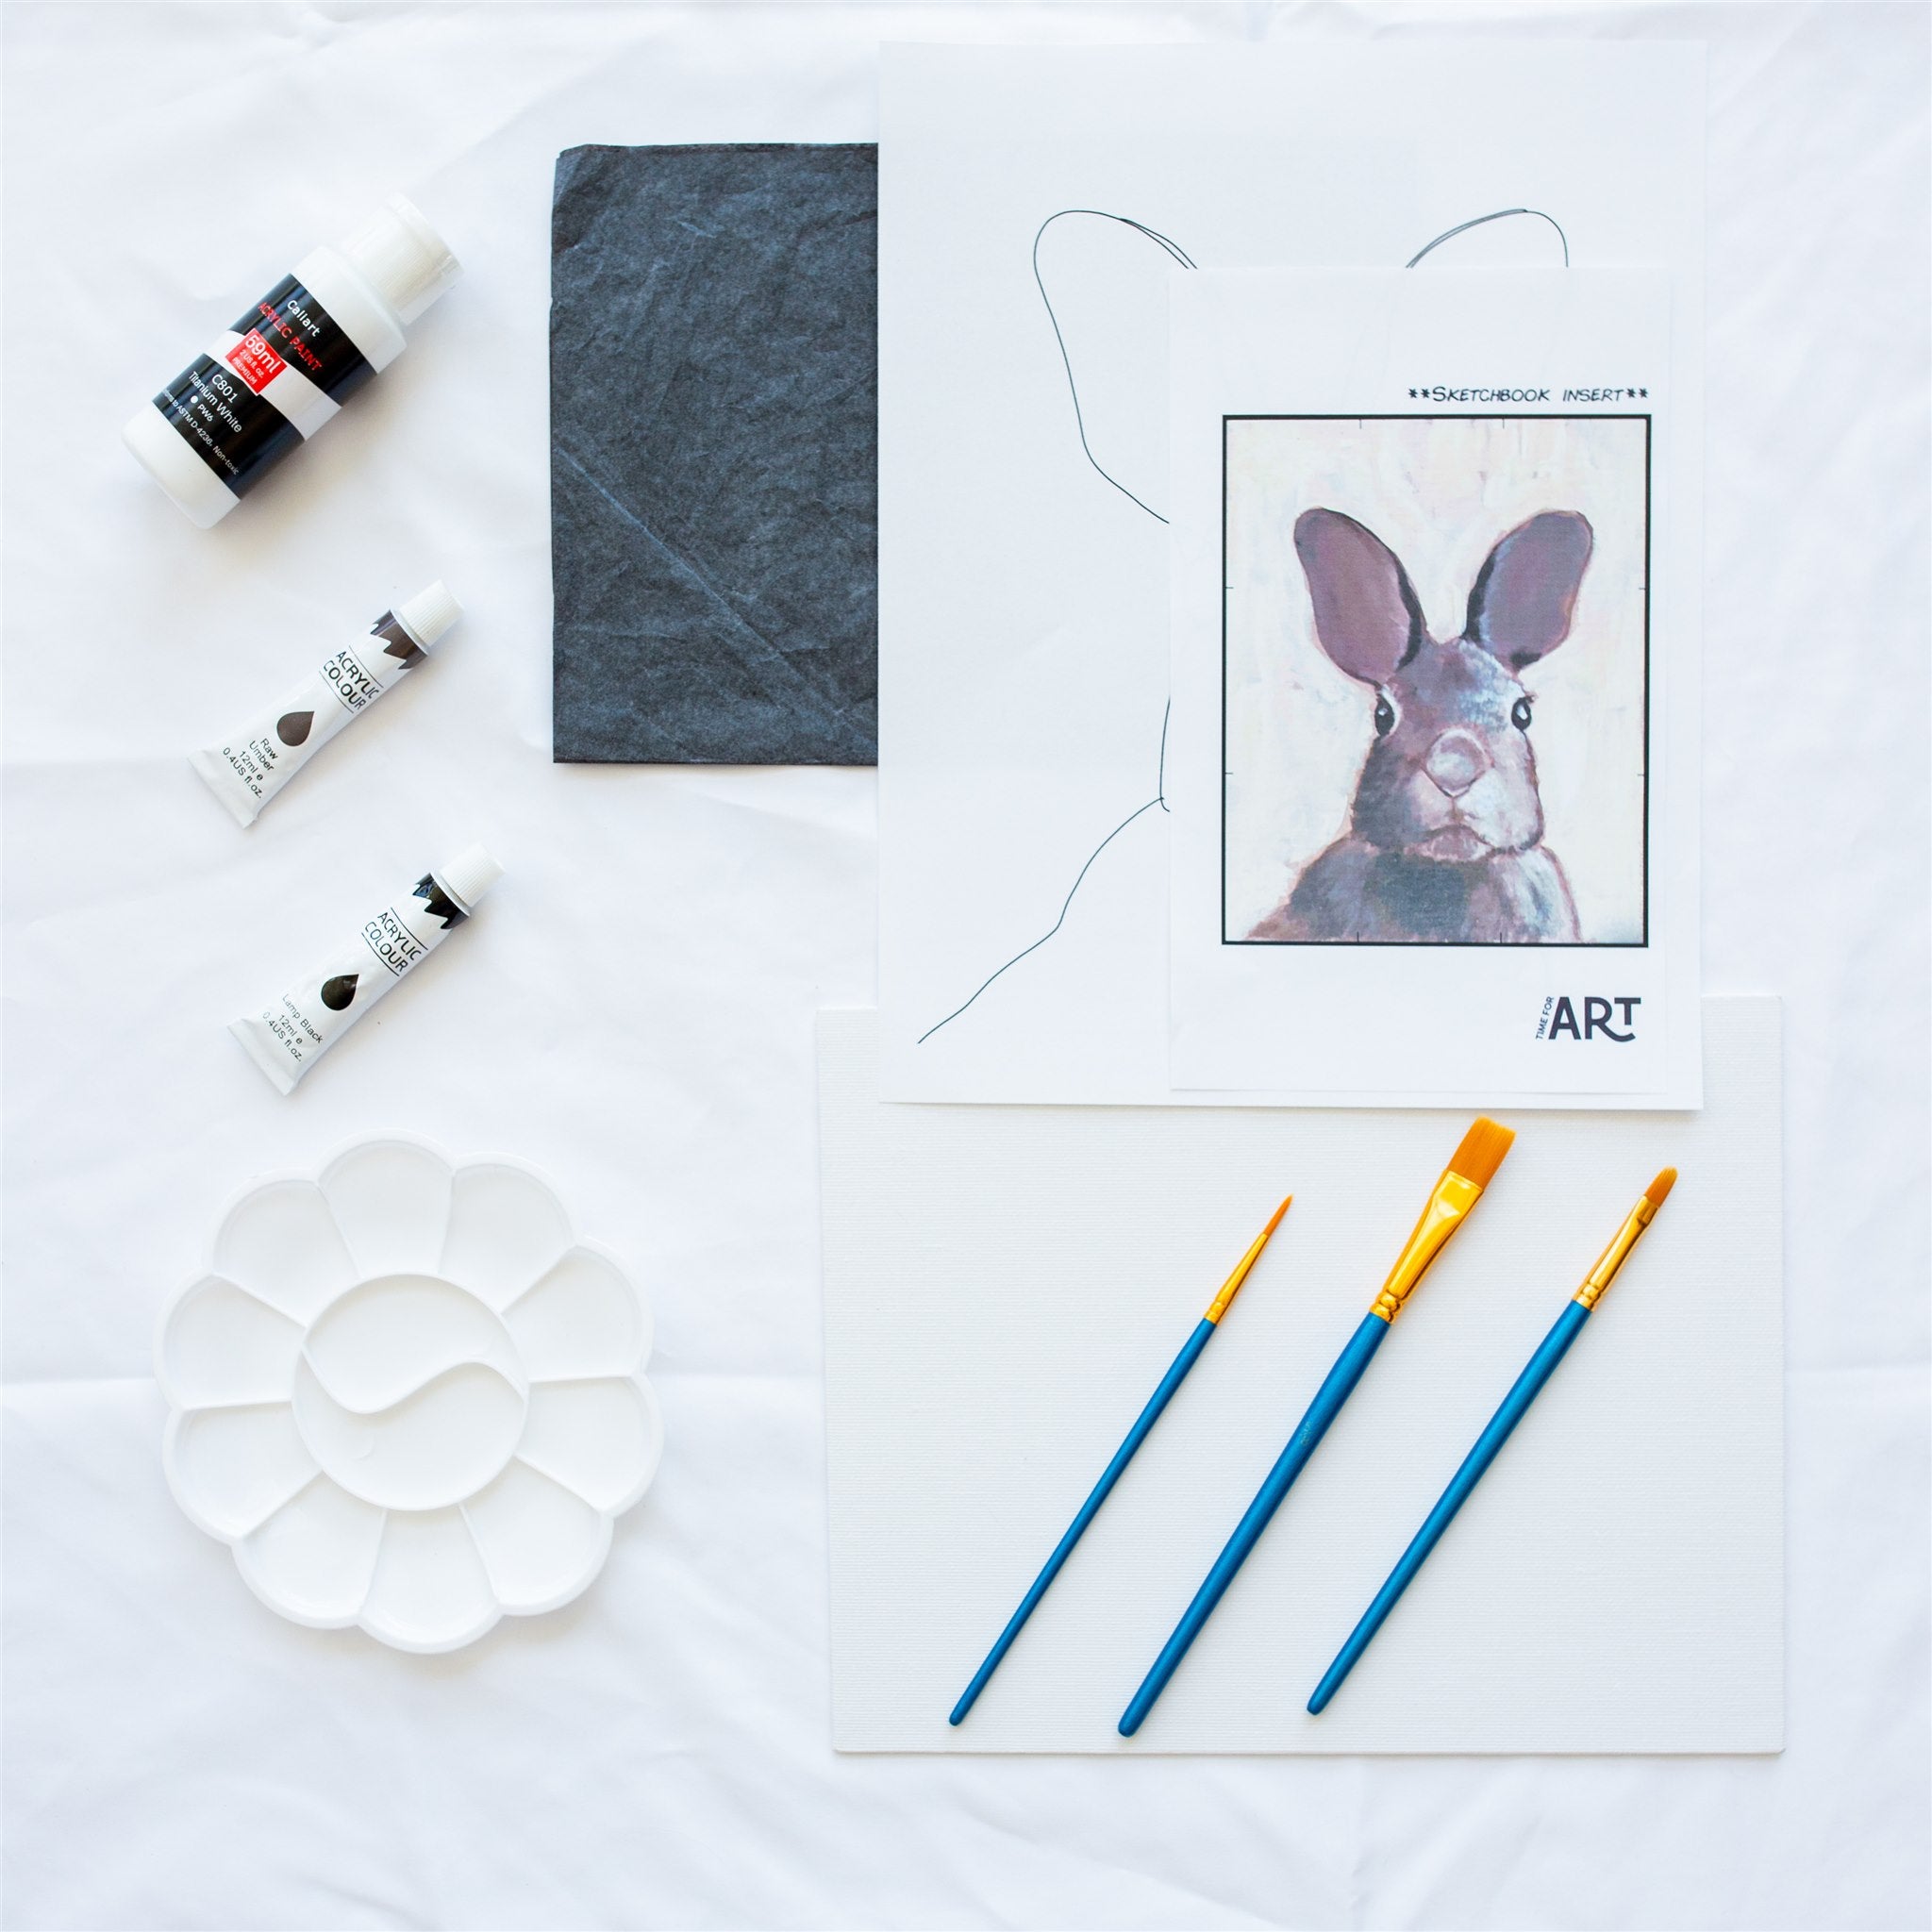 Whats included in the baby bunny painting kit. 4 acrylic paints, painters pallet, brushes, canvas panel, traceable outline, and reference image.